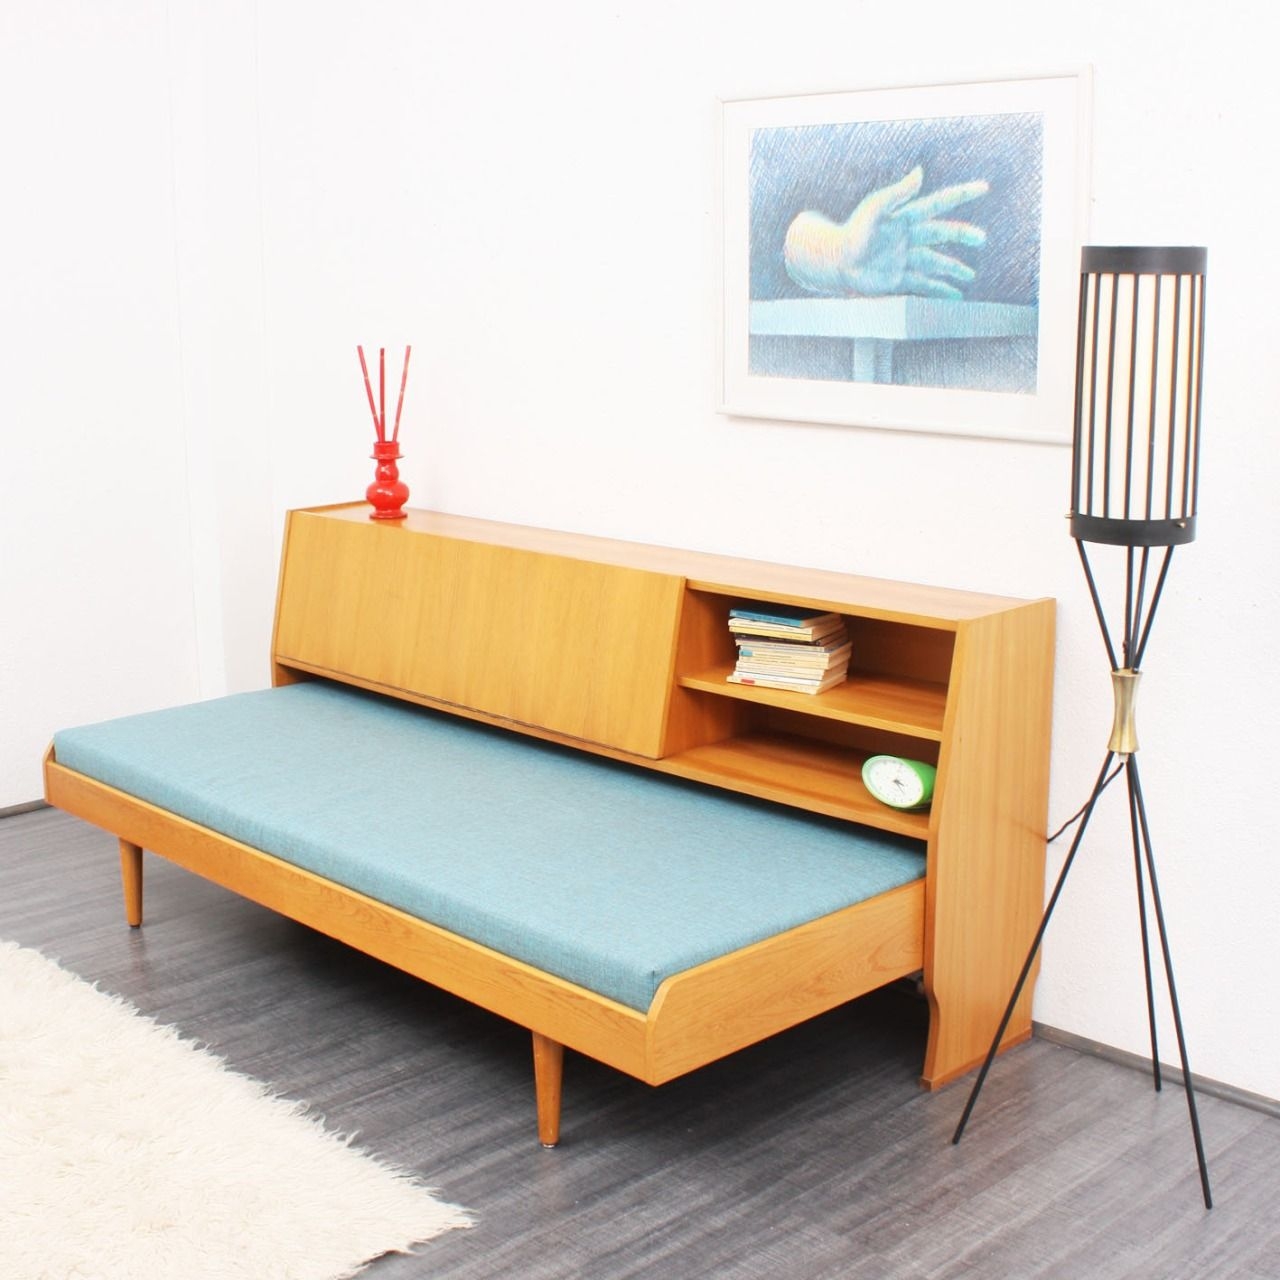 Diy daybed with storage